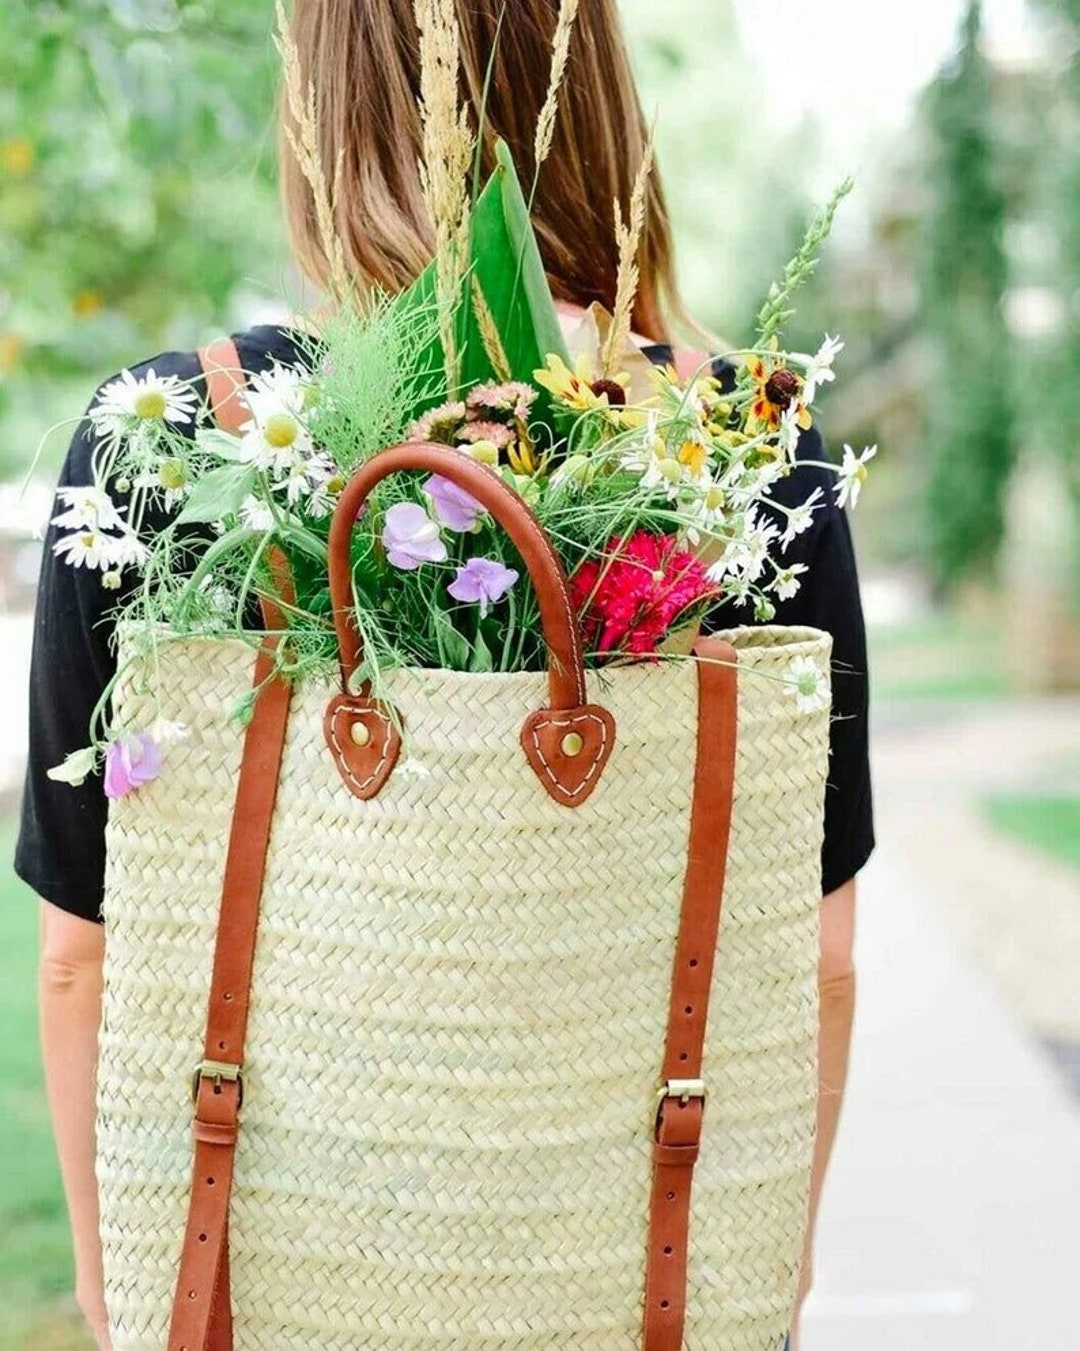 French basket with leather strap, Straw backpack, Beach bag, Hipster  backpack, straw basket, summer bag